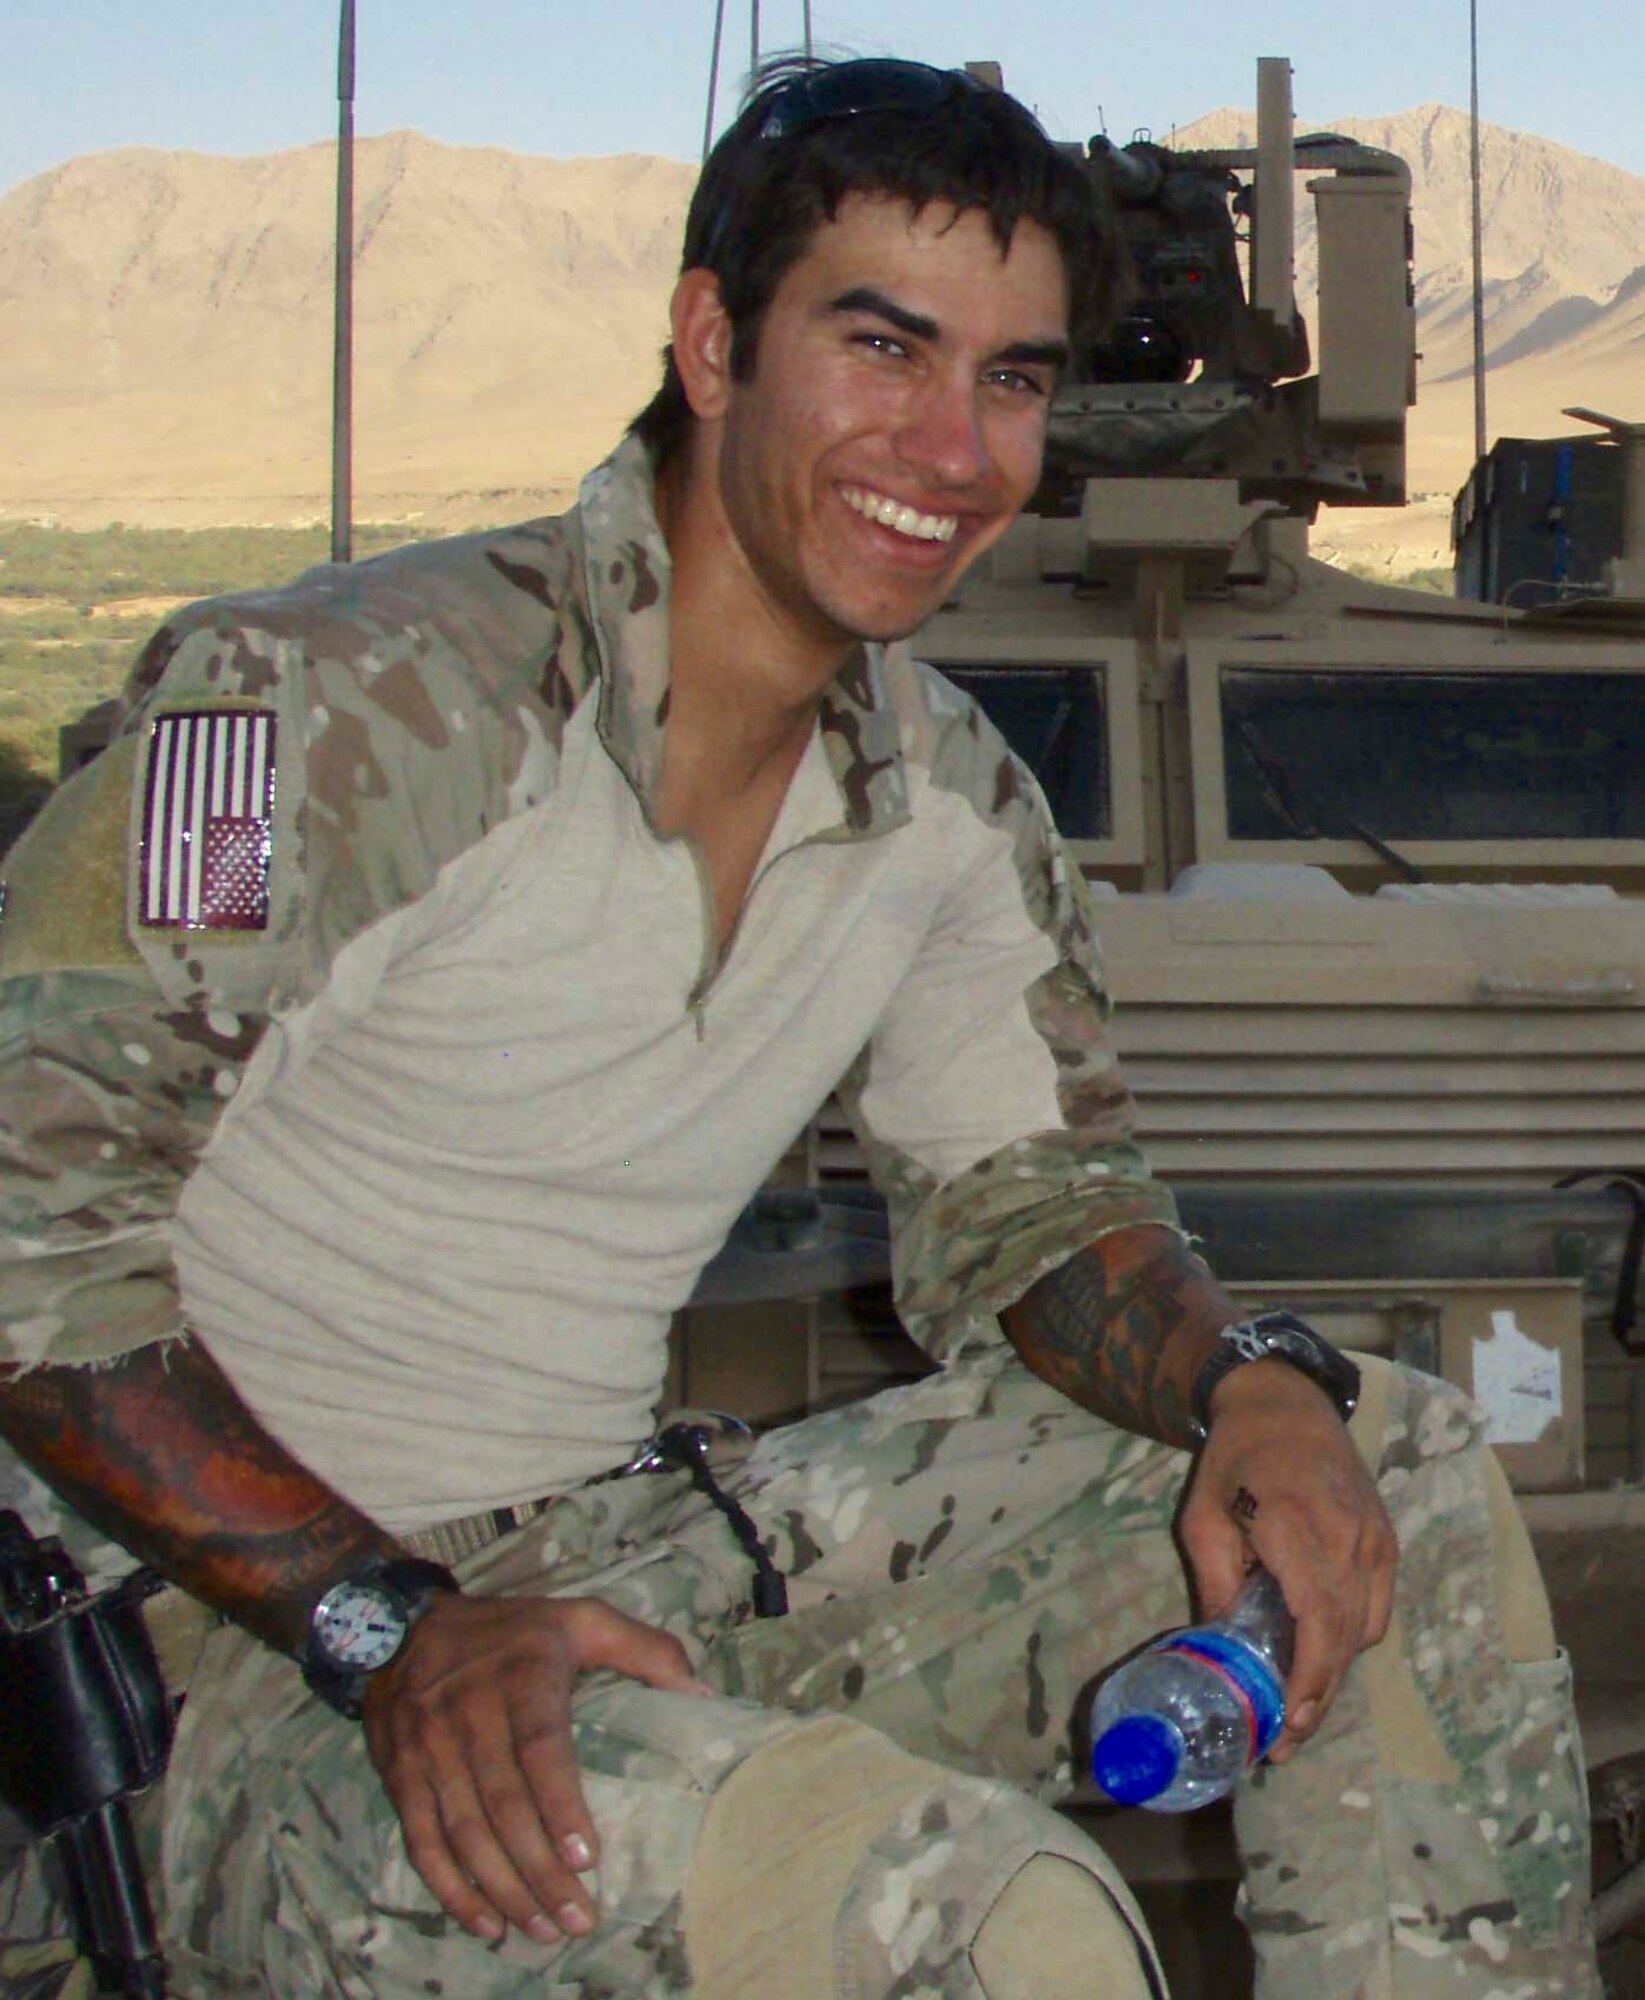 U.S. Air Force Senior Airman Daniel Ray Sanchez, Special Operations Command combat controller, was killed in action in Afghanistan, Sep. 16, 2010, while supporting Operation Enduring Freedom. Sanchez was assigned to the 23rd Special Tactics Squadron, Hurlburt Field, Florida. (Photo courtesy of Yvette Duchene)